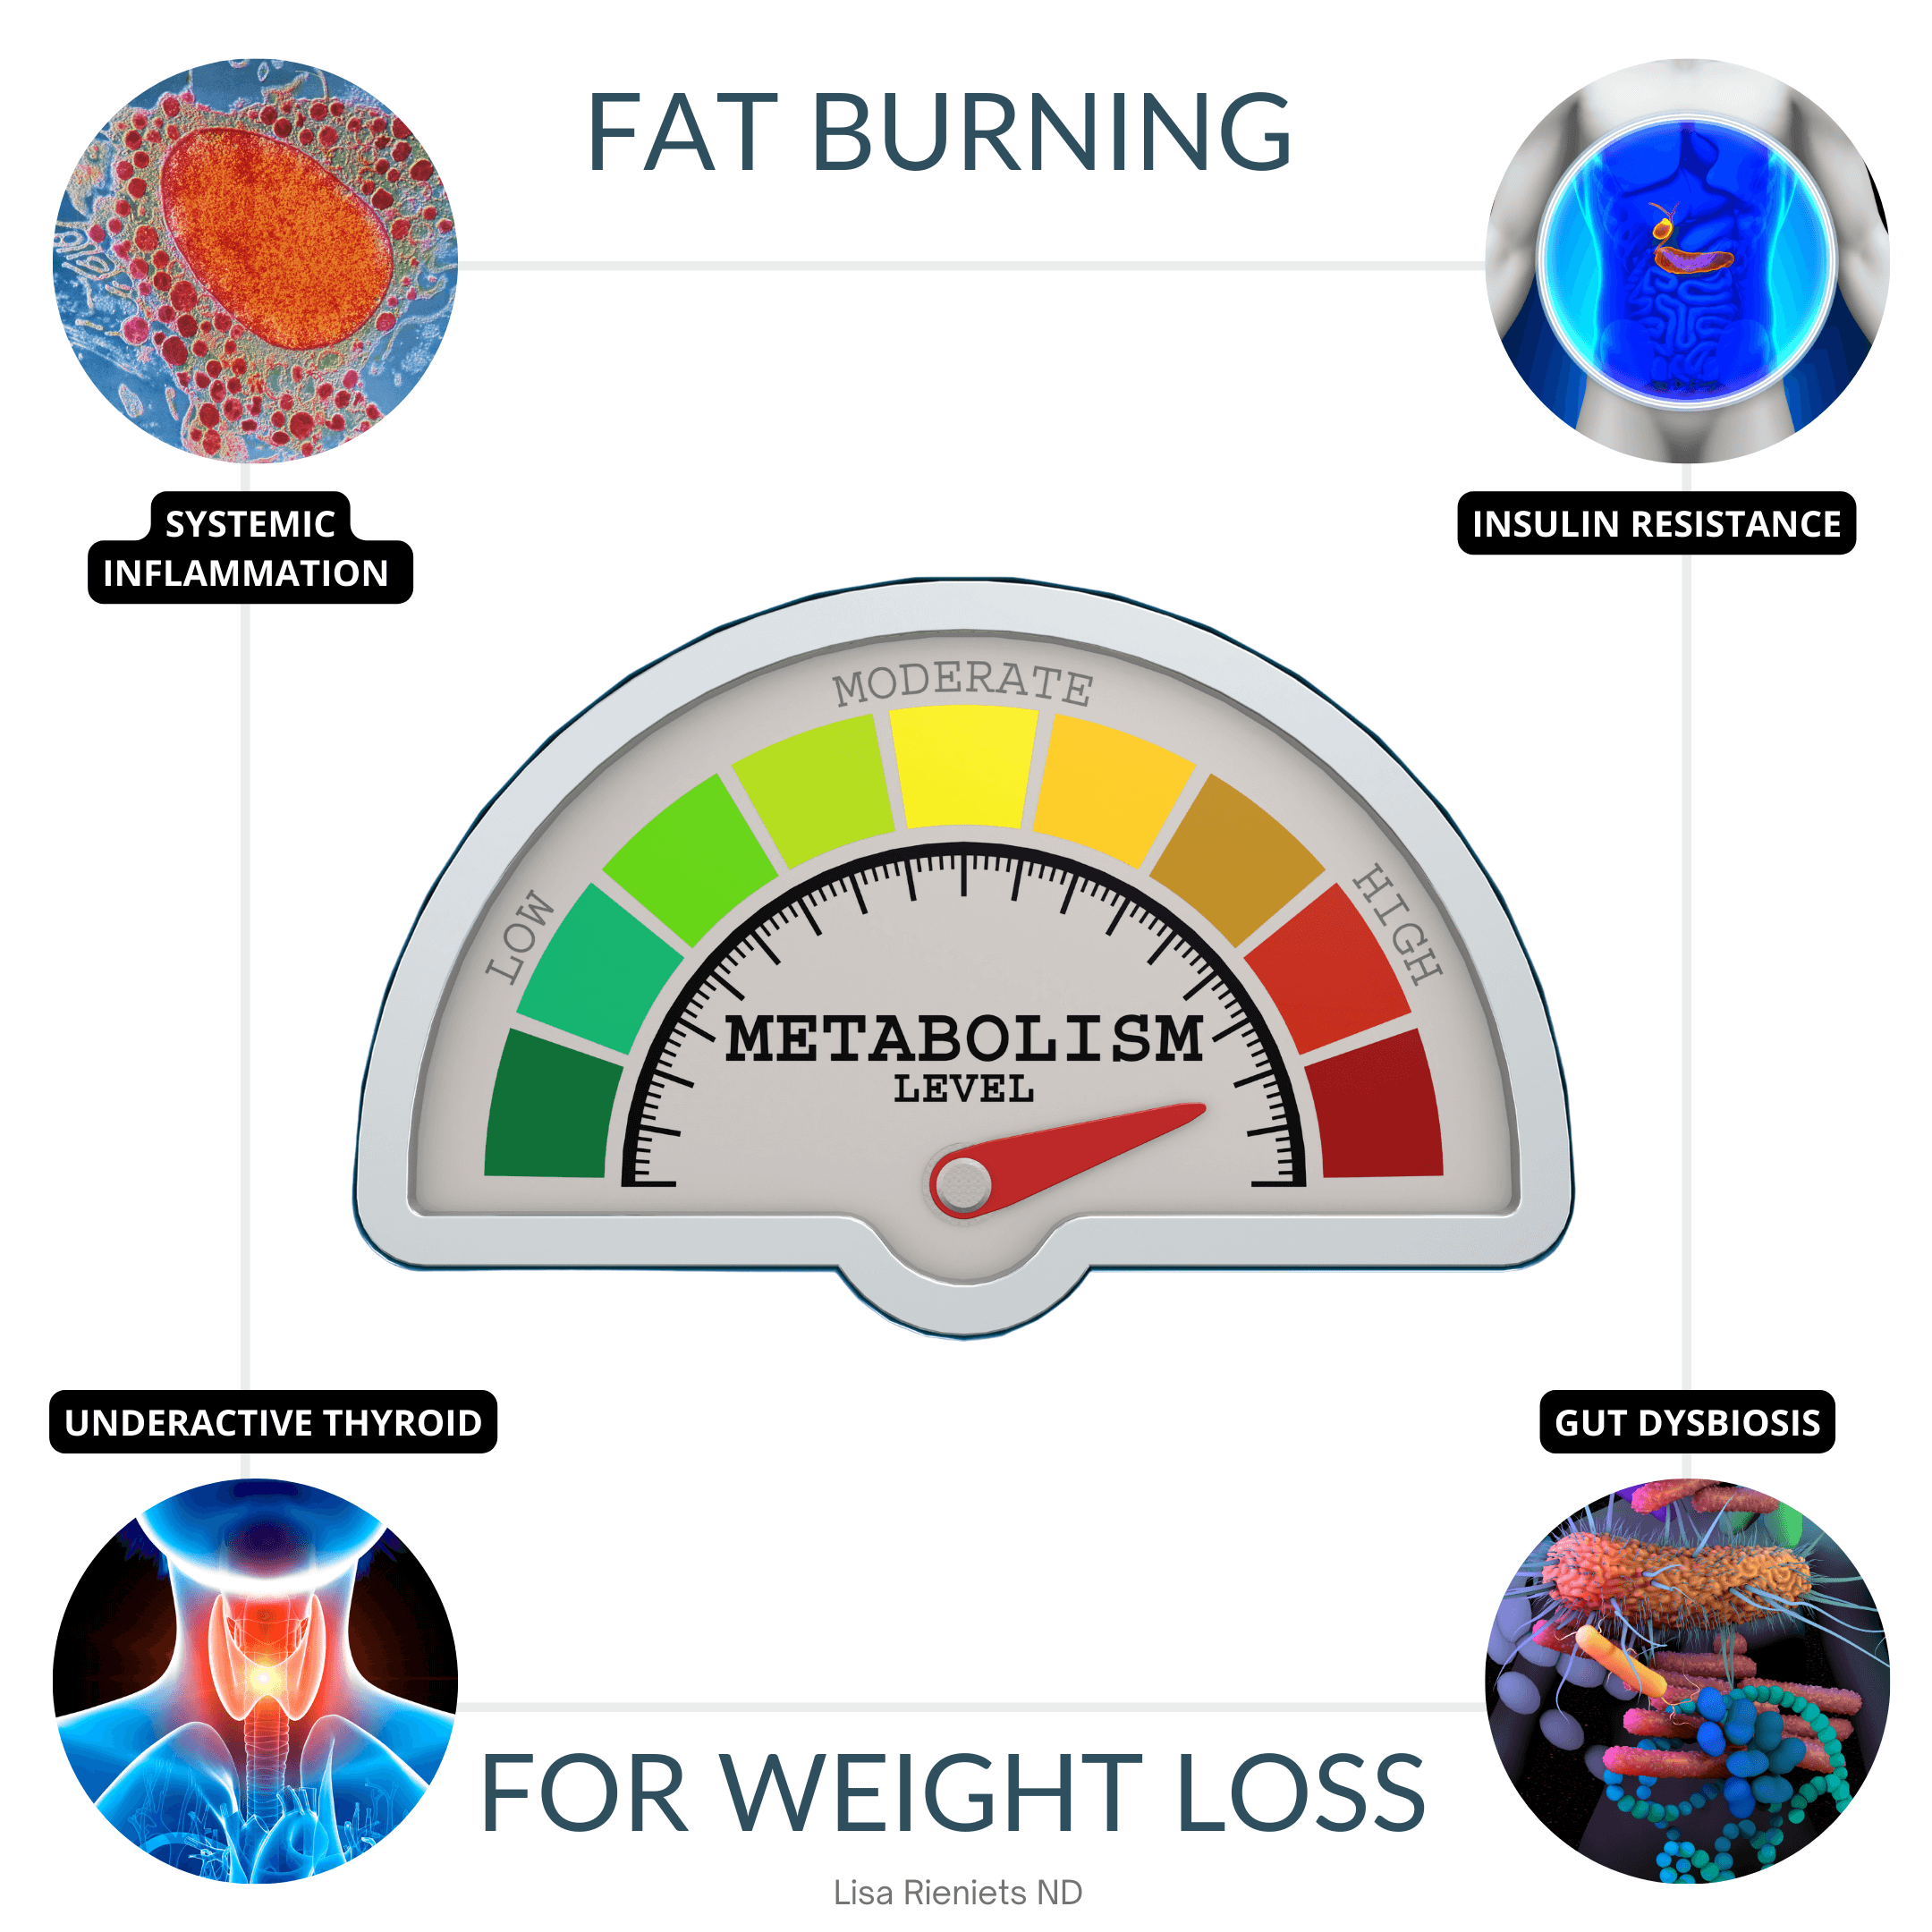 Four most common metabolic imbalances connected to weight loss and fat burning difficulties are Gut dysbiosis, Systemic inflammation, Insulin resistance, and an Underactive thyroid.